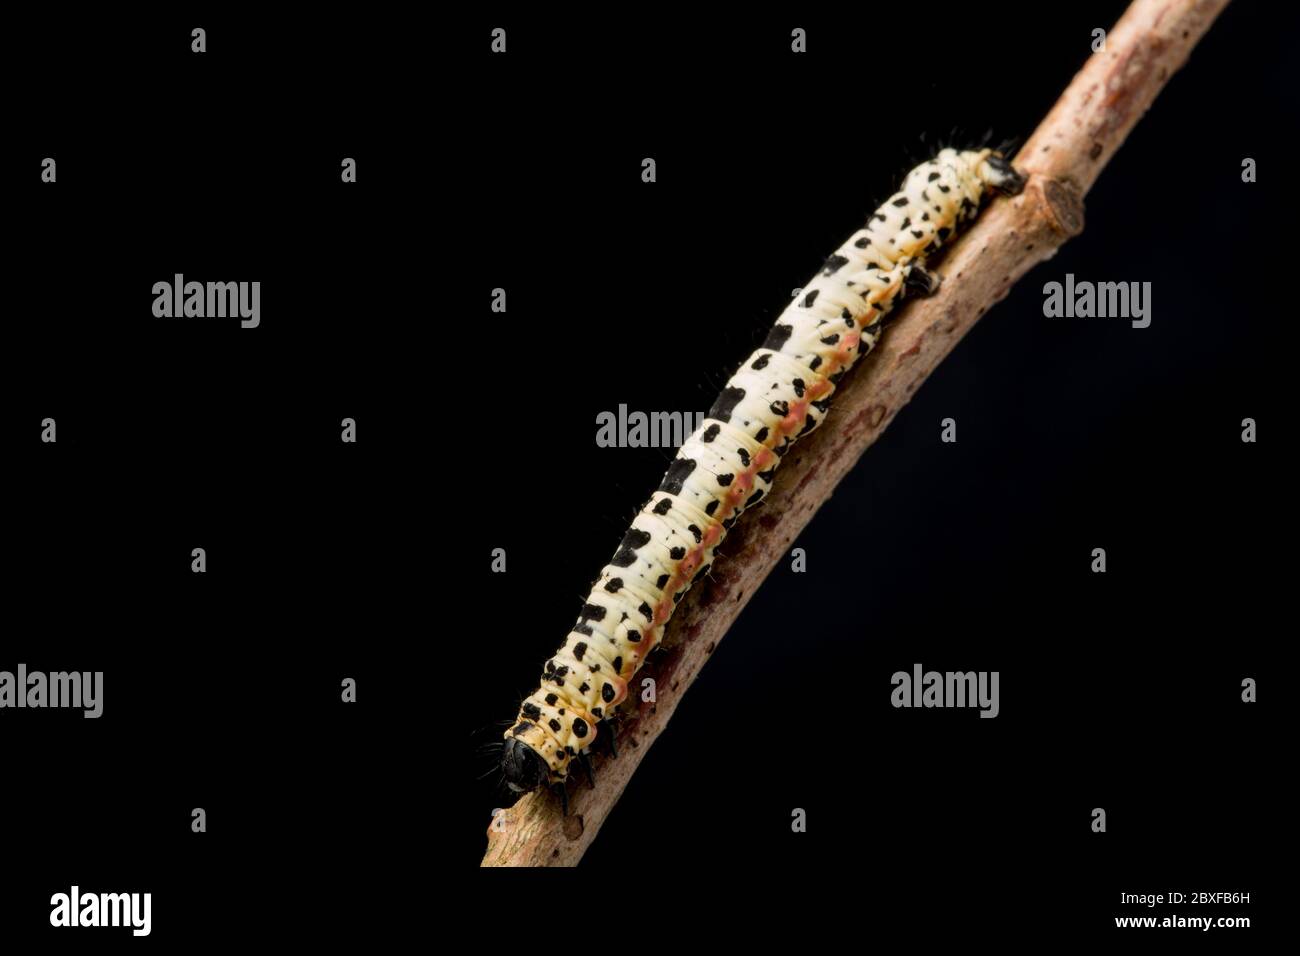 An example of the caterpillar, or larva, of the Magpie moth, Abraxas grossulariata, photographed in a studio against a black background before release Stock Photo